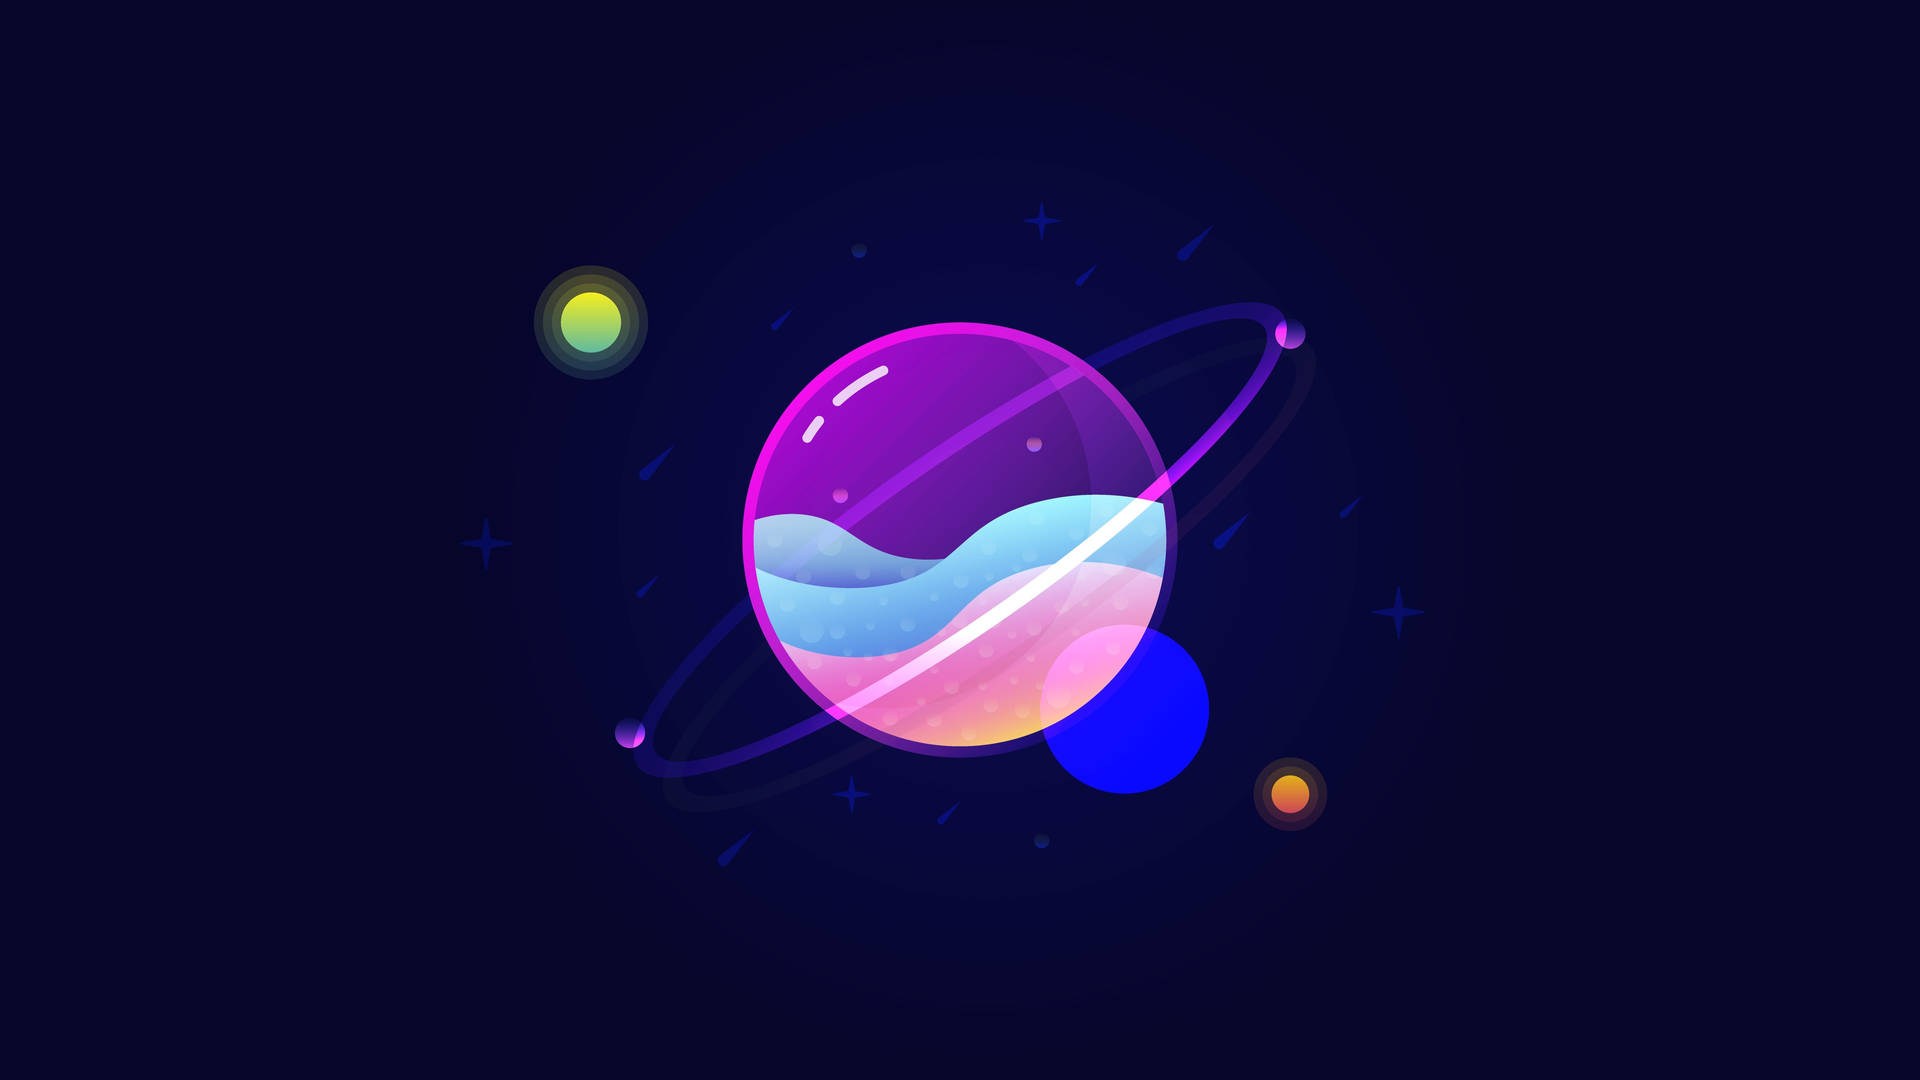 4k Vector Planets Background